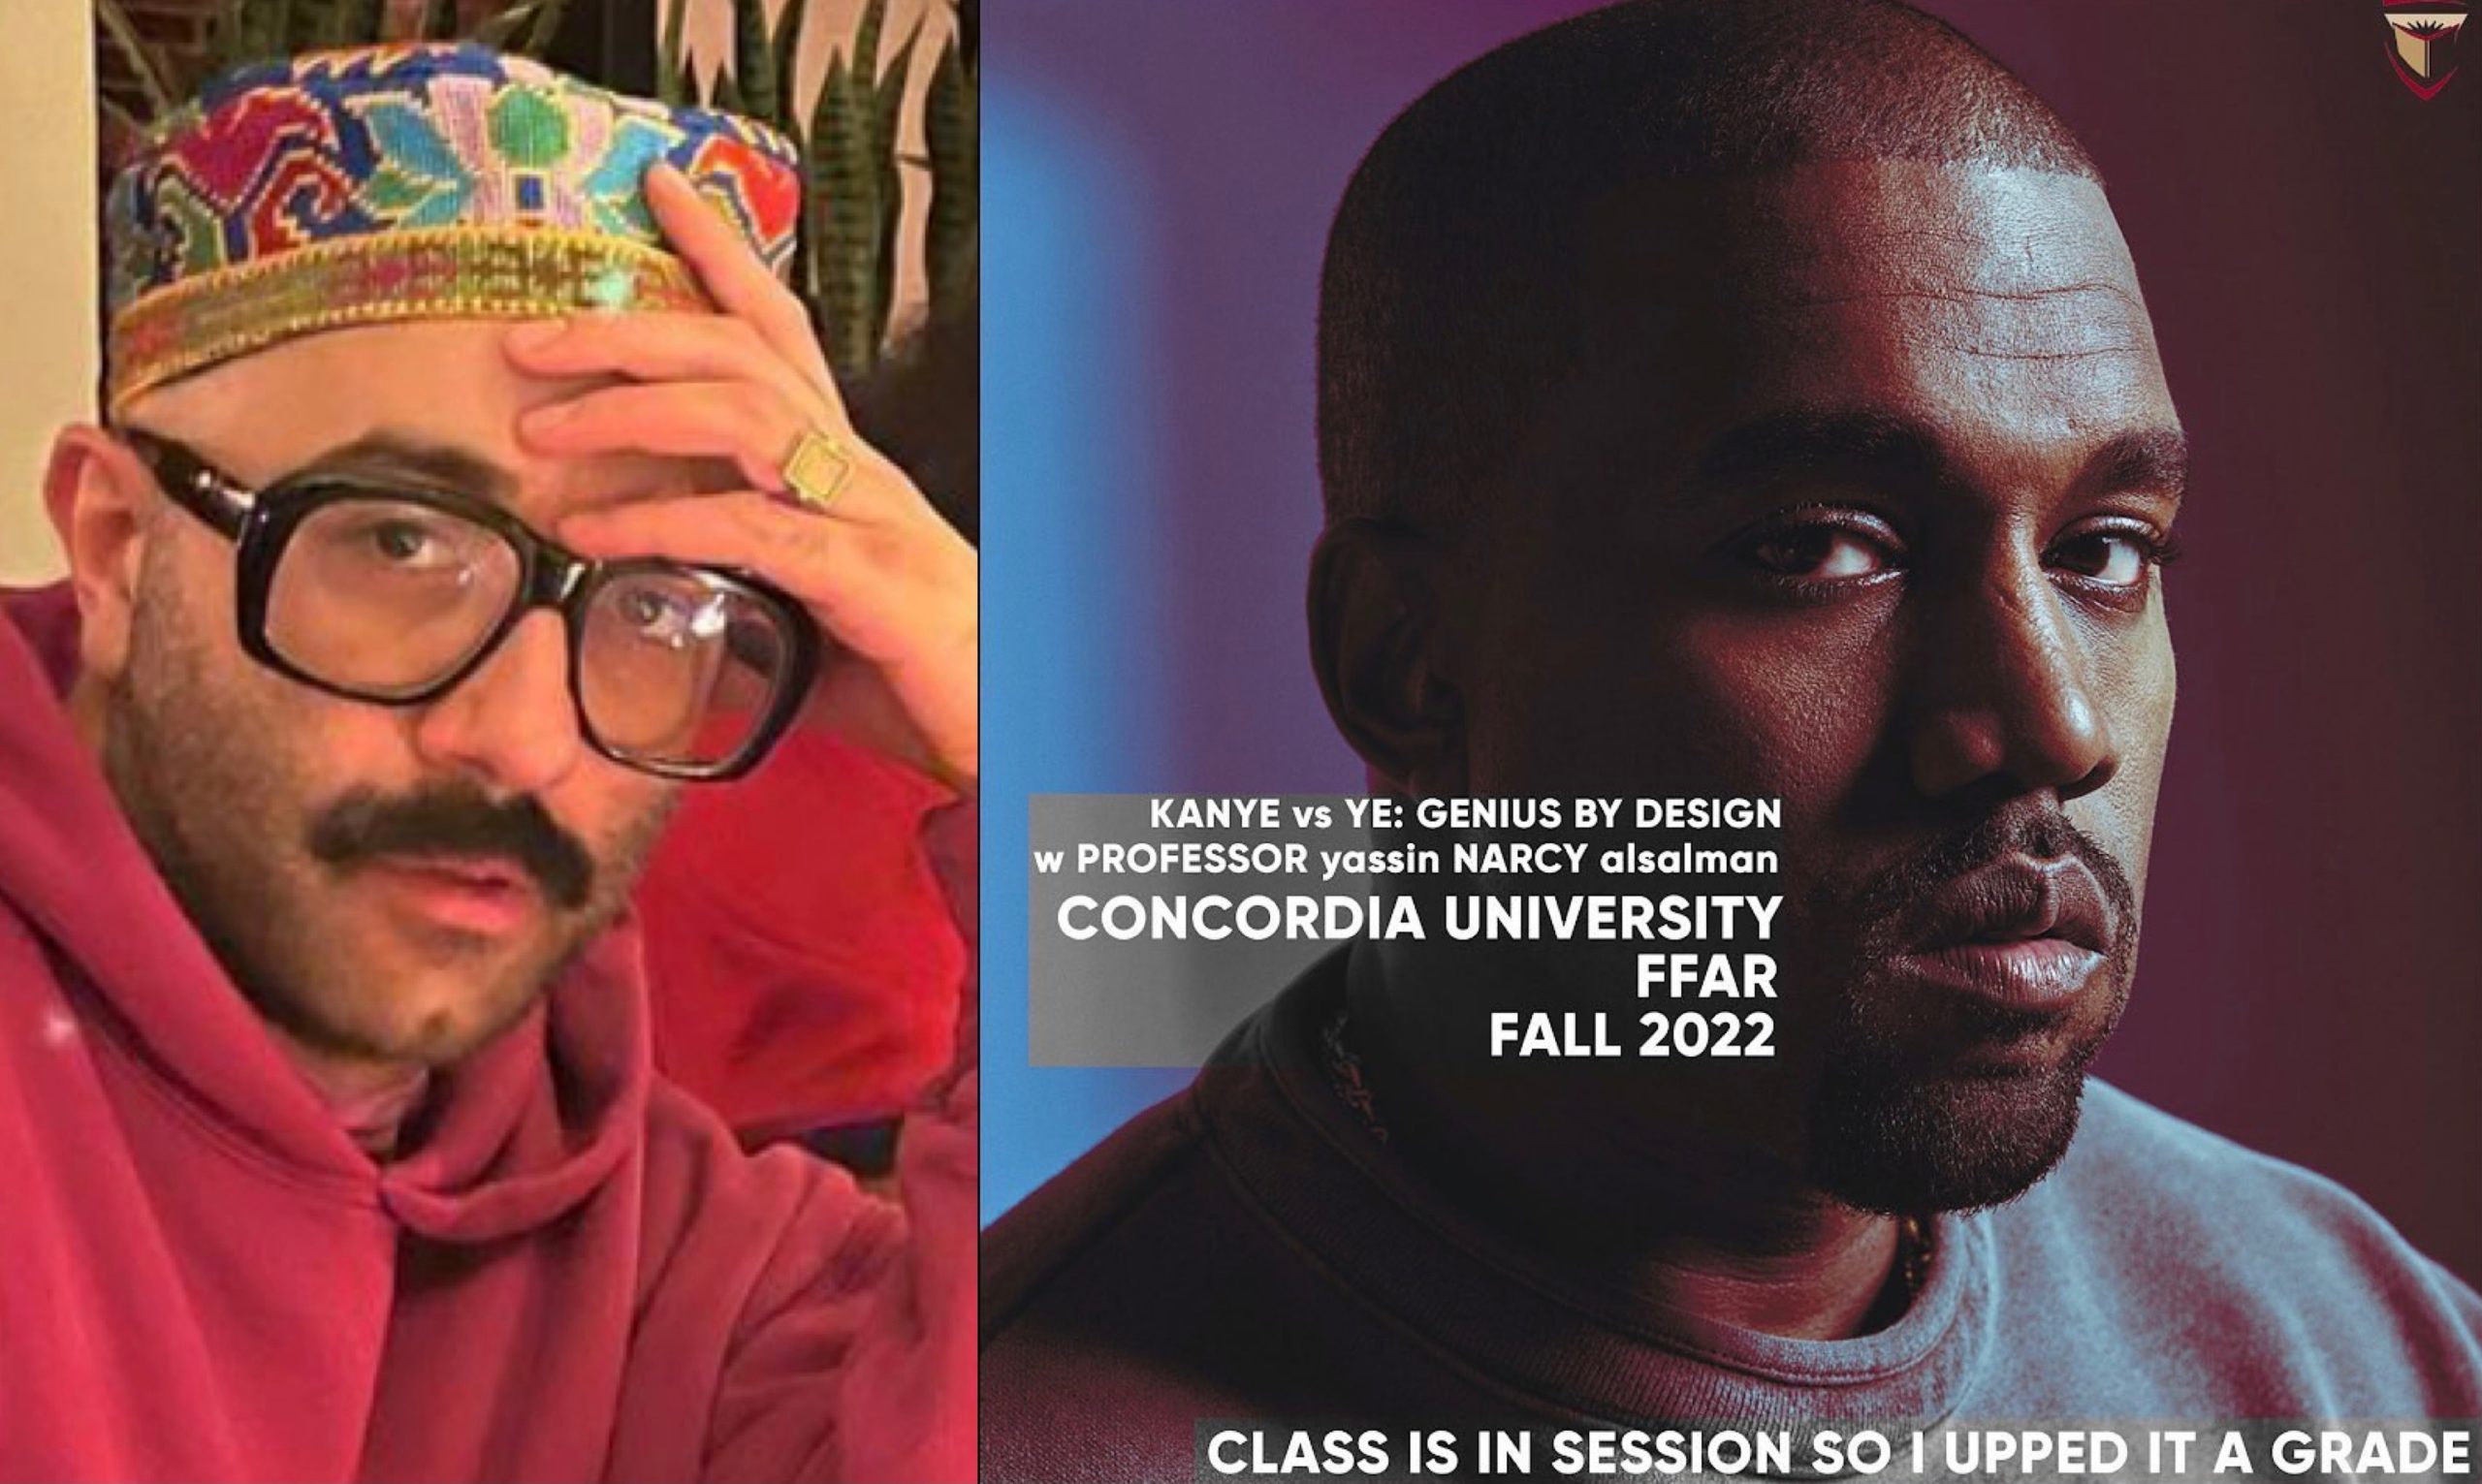 Would You Enroll? Iraqi-Canadian Rapper Narcy To Lead First Ever Course On Kanye West At Montreal's Concordia University